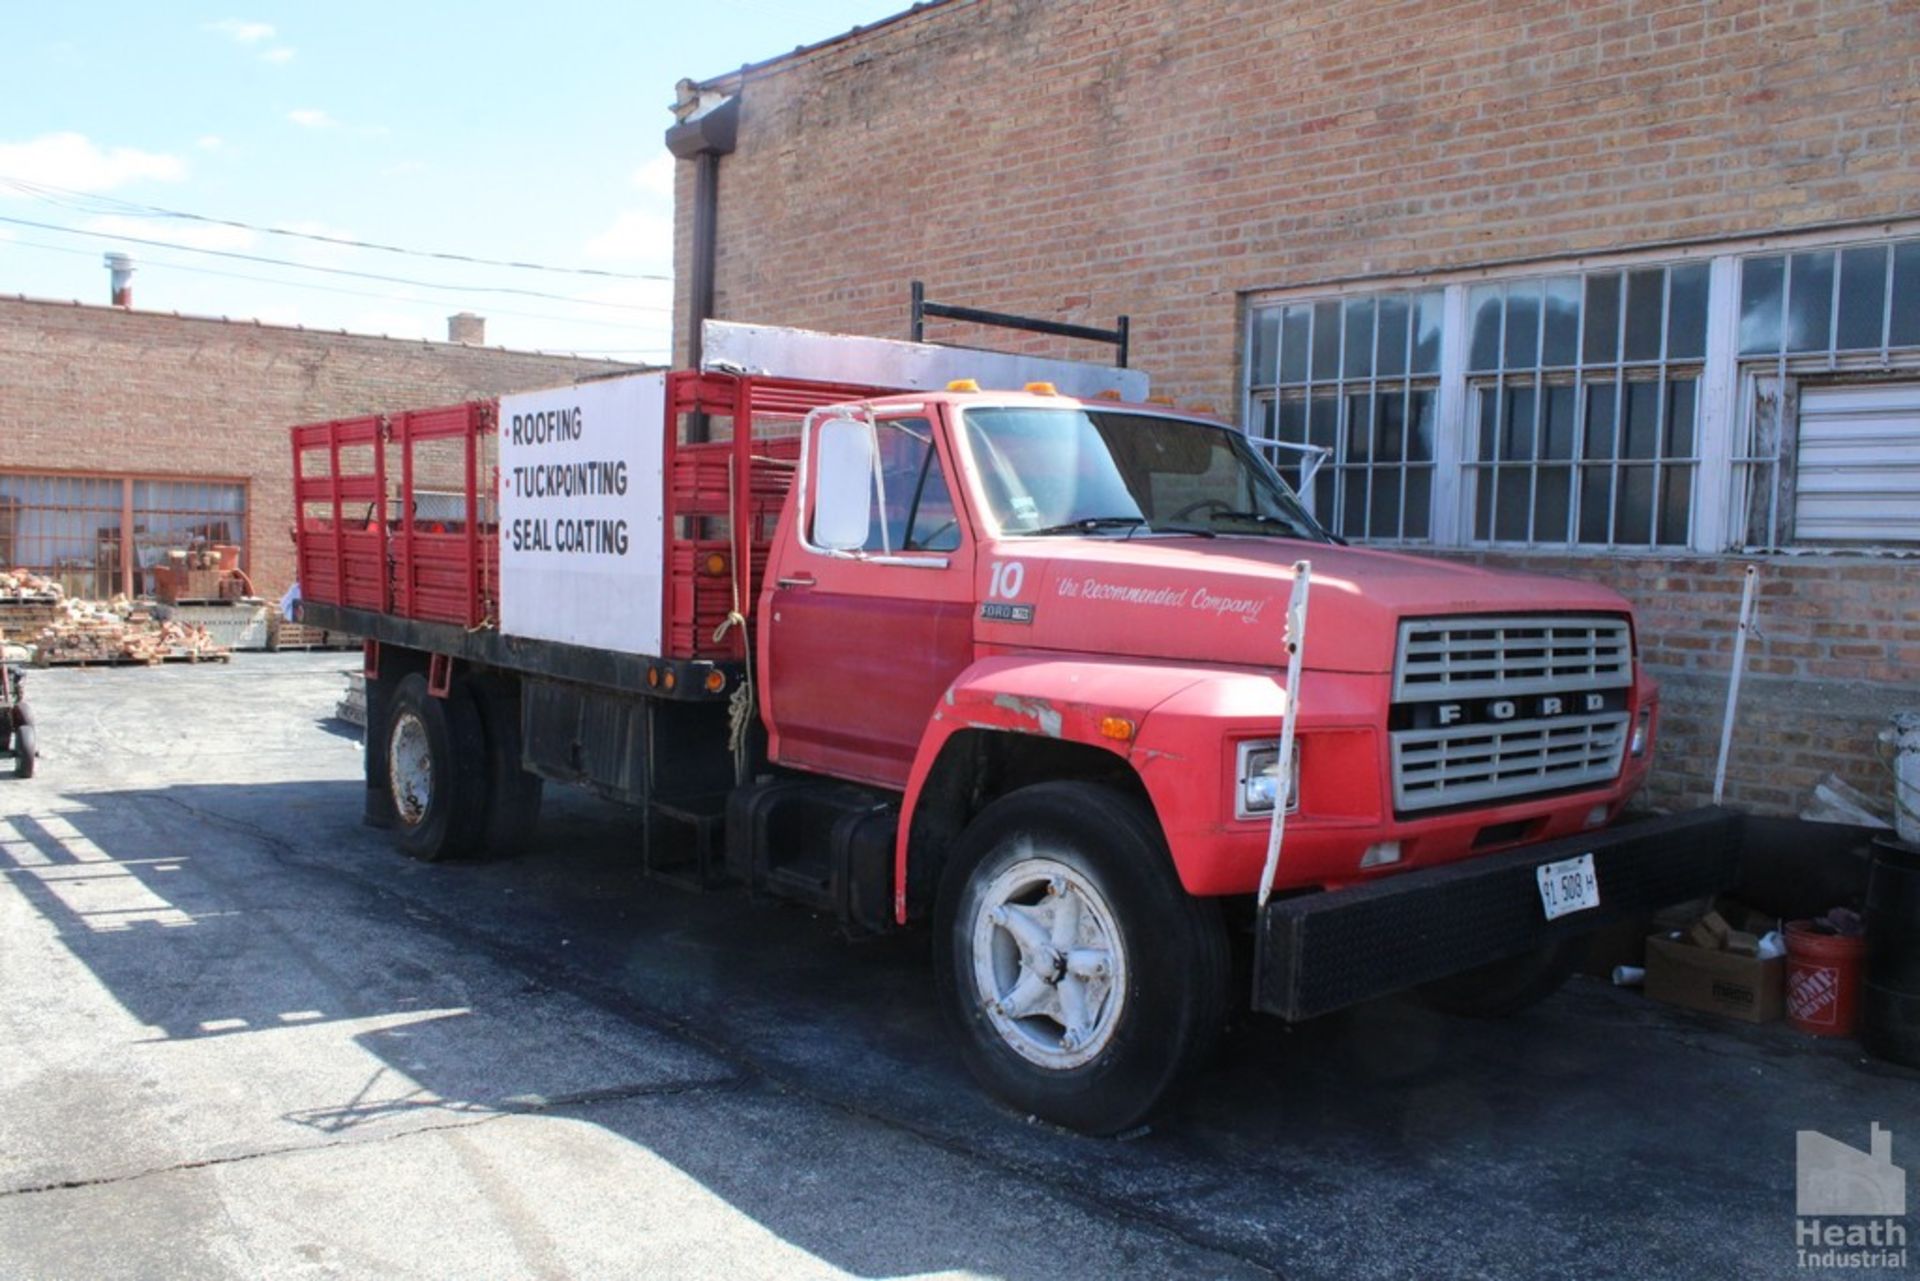 1980 FORD MODEL F700 STAKE TRUCK, VIN F70HVGH0858, AUTOMATIC TRANSMISSION, 16' STEEL DECK WITH